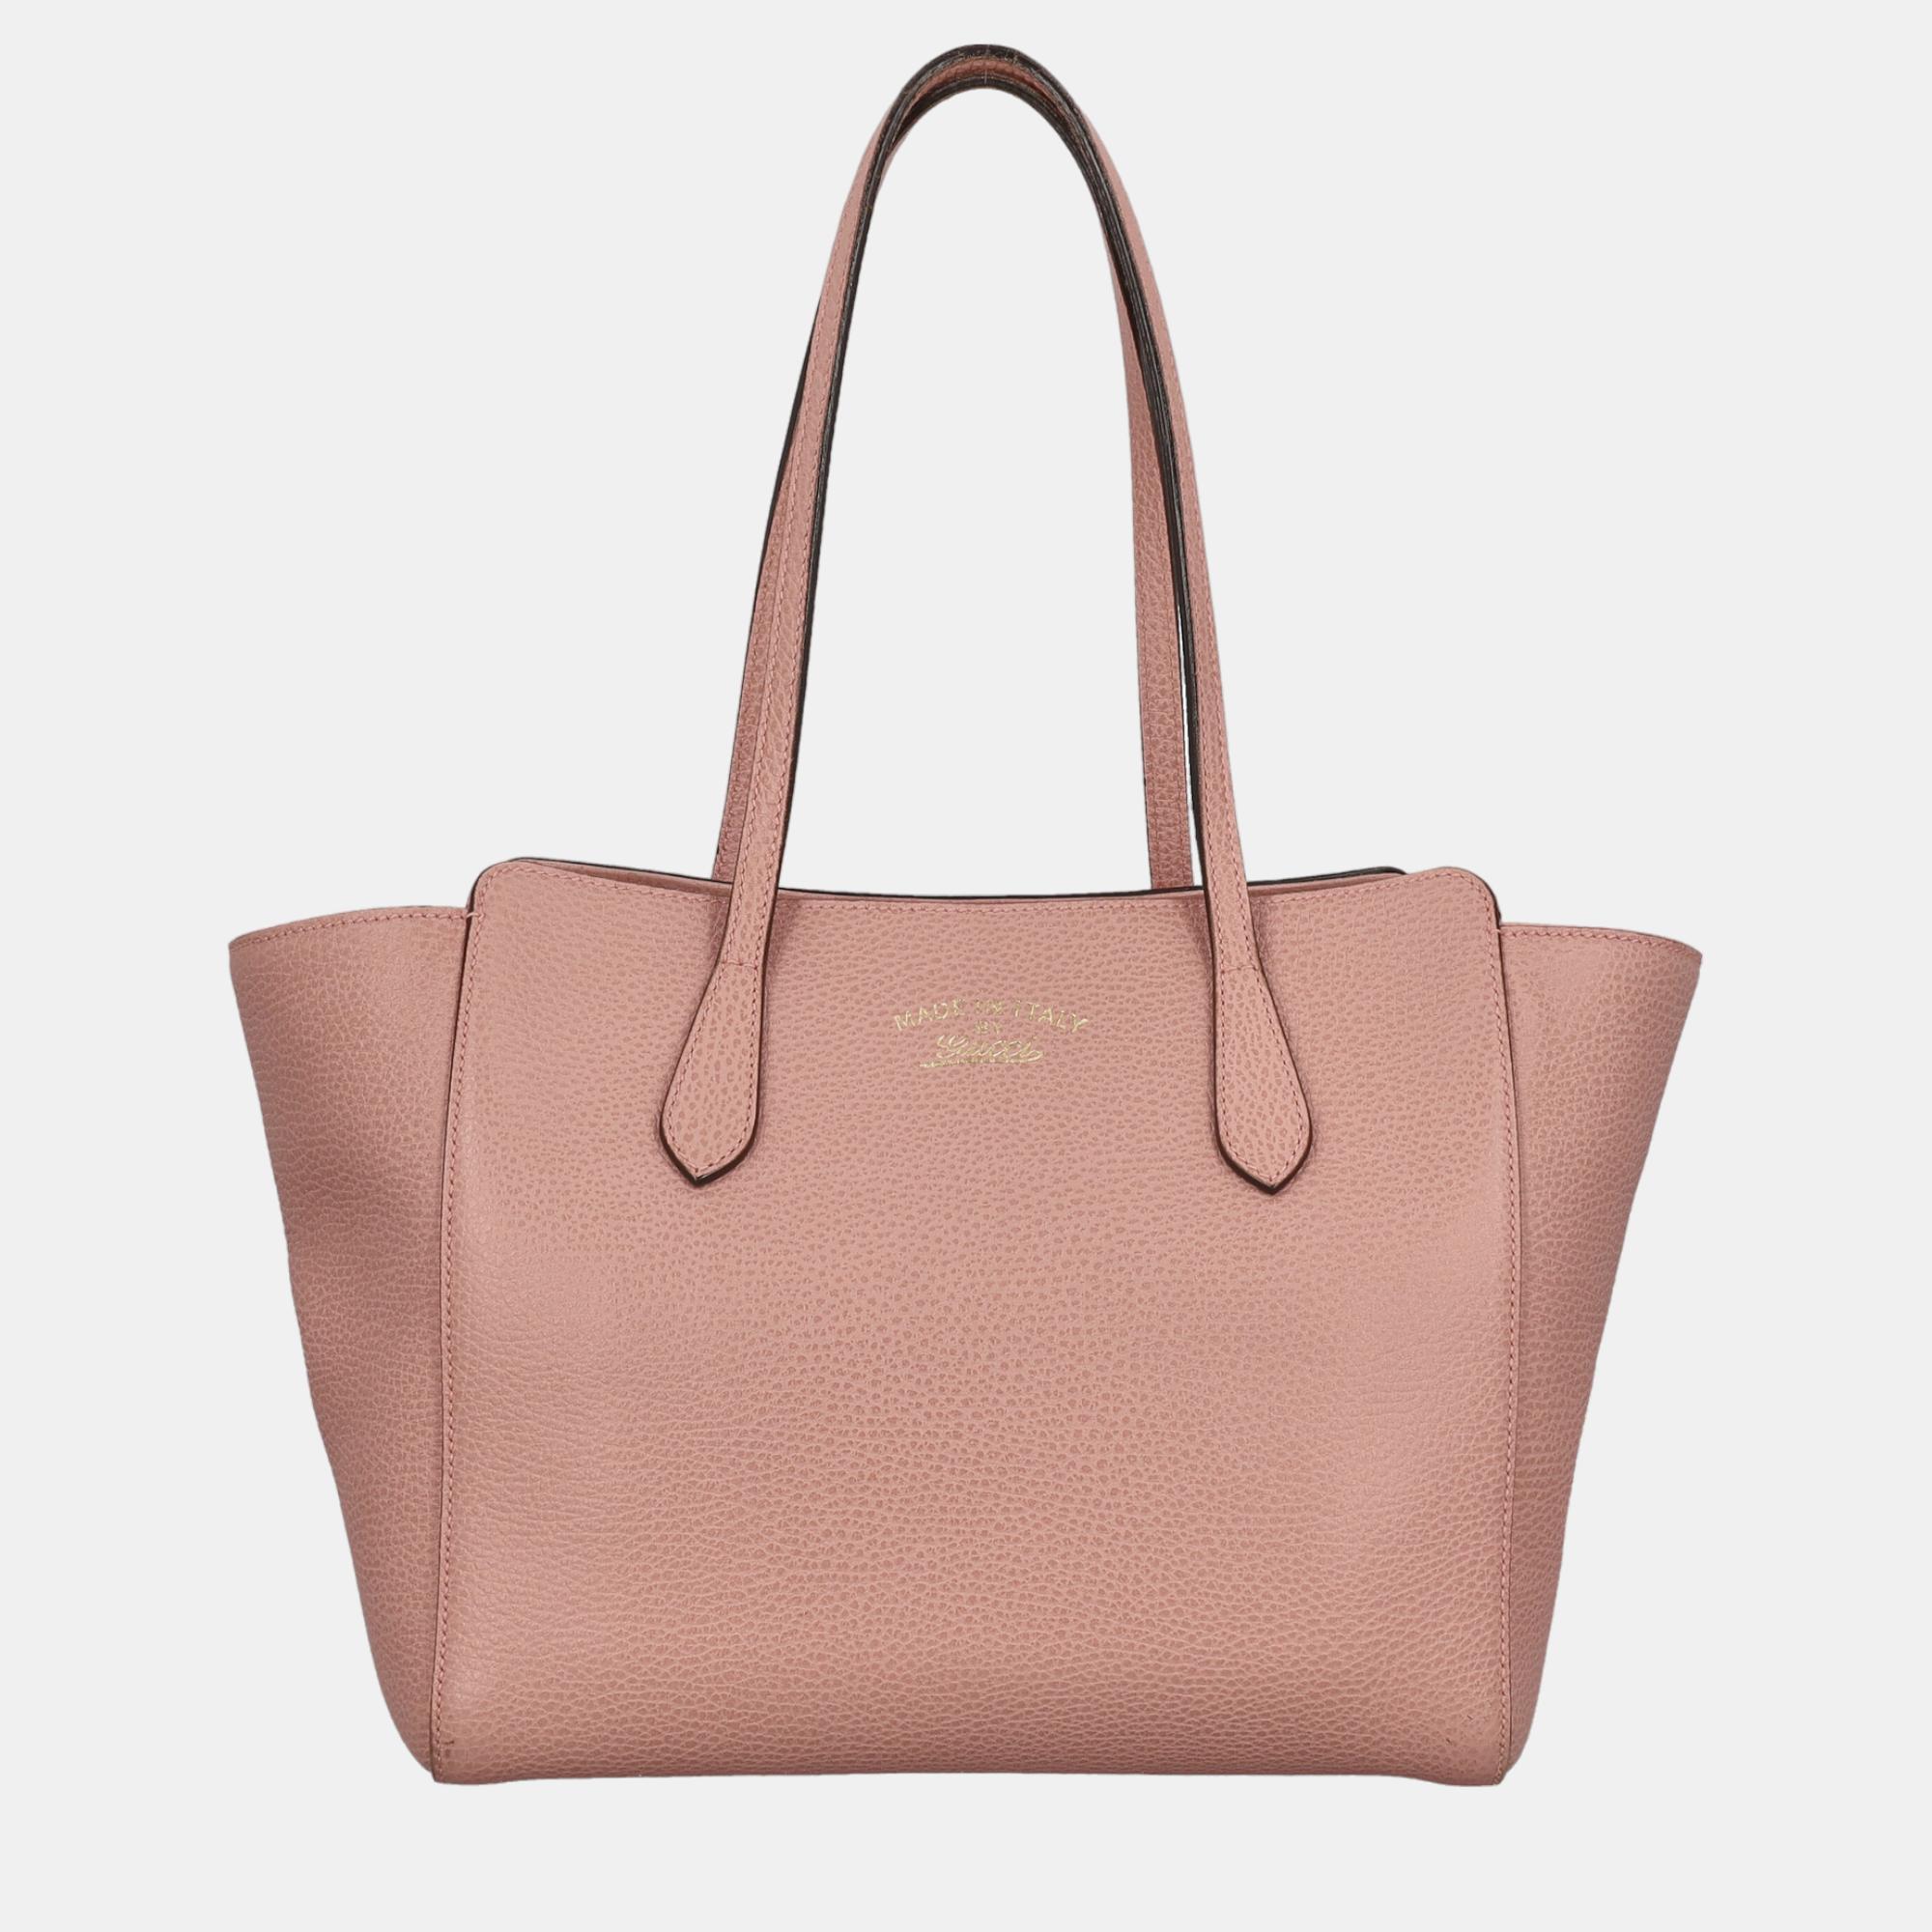 Gucci Swing -  Women's Leather Tote Bag - Pink - One Size